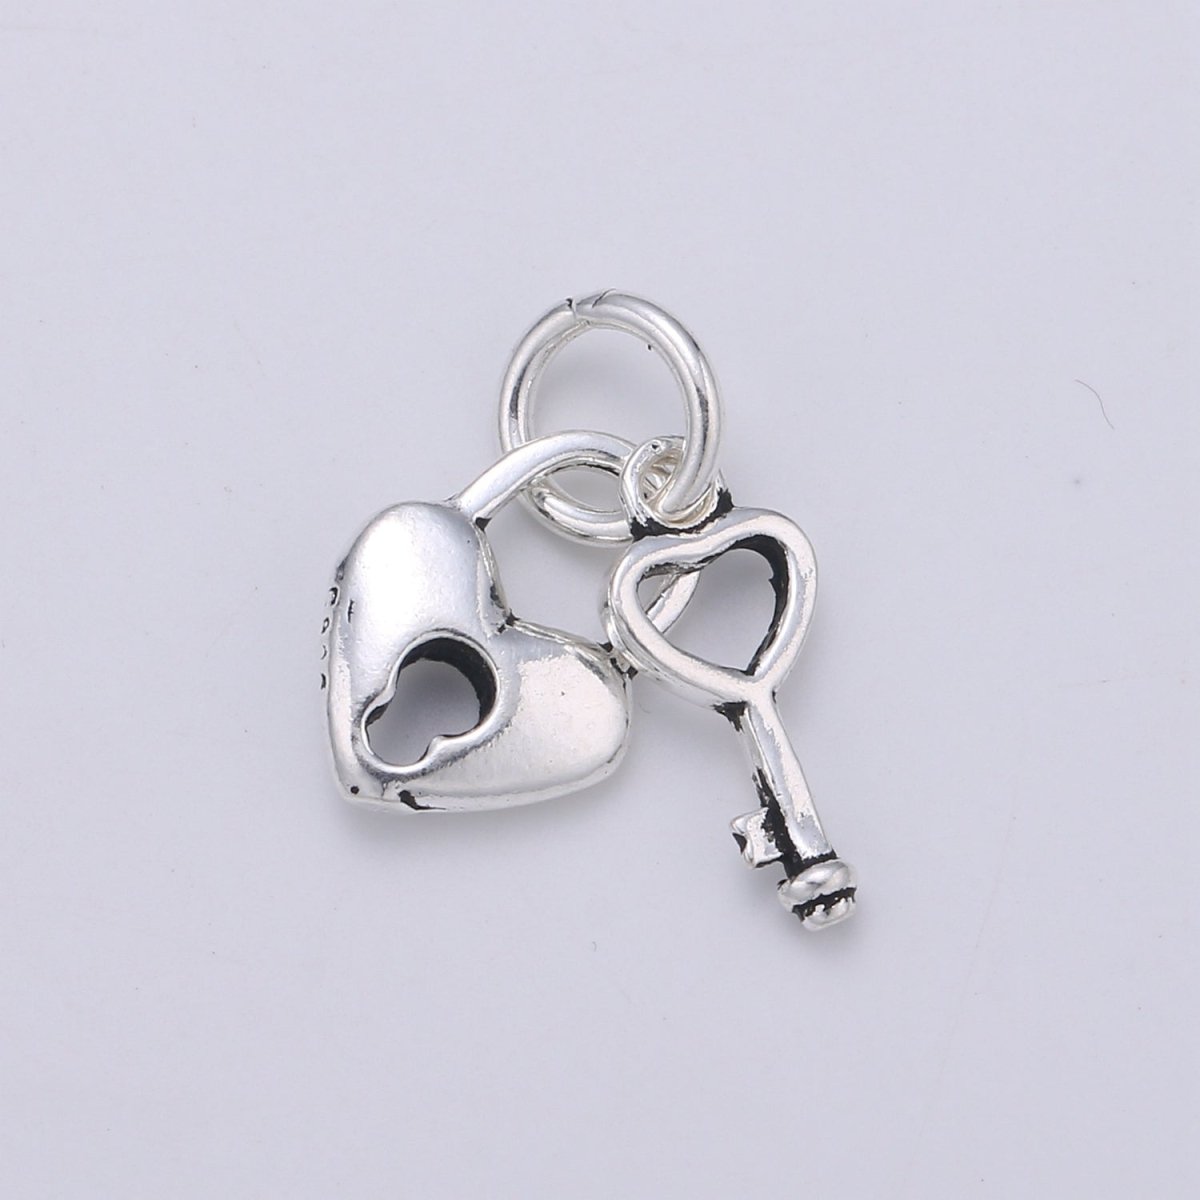 925 Sterling Silver Lock and Key Charm, Couples Charm Silver Heart Charm for Necklace Bracelet Earring, Love Charm SL-127 - DLUXCA